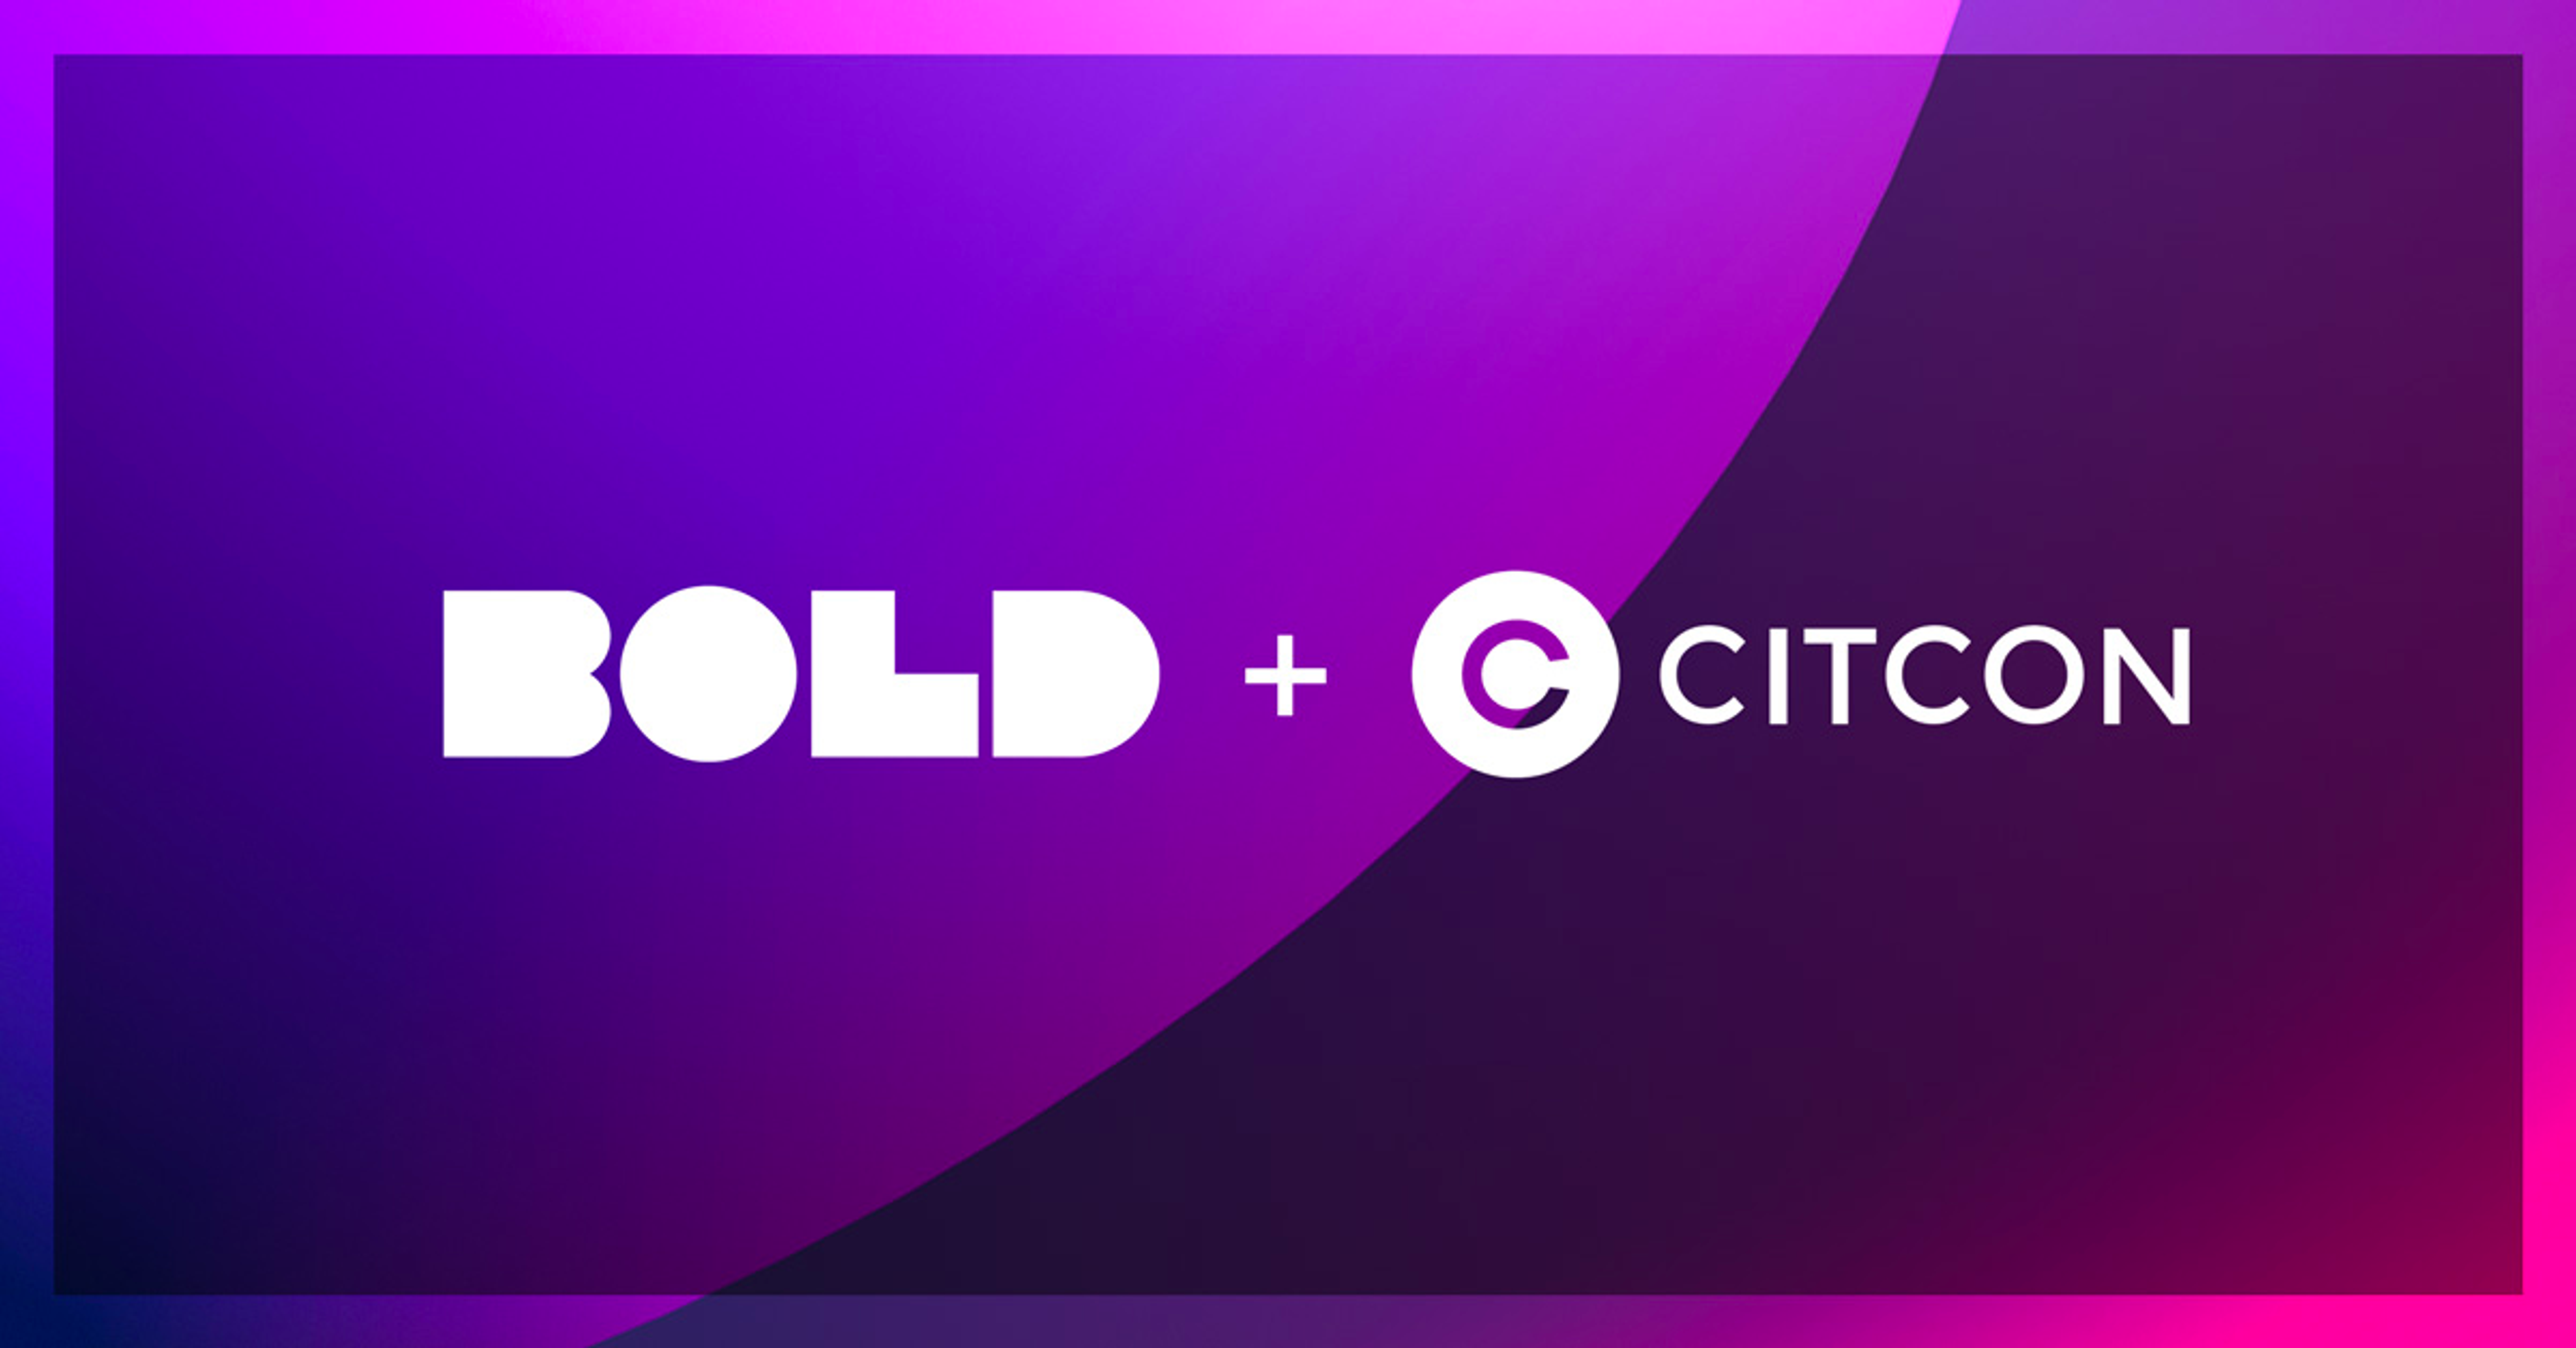 Bold Commerce and Citcon logos